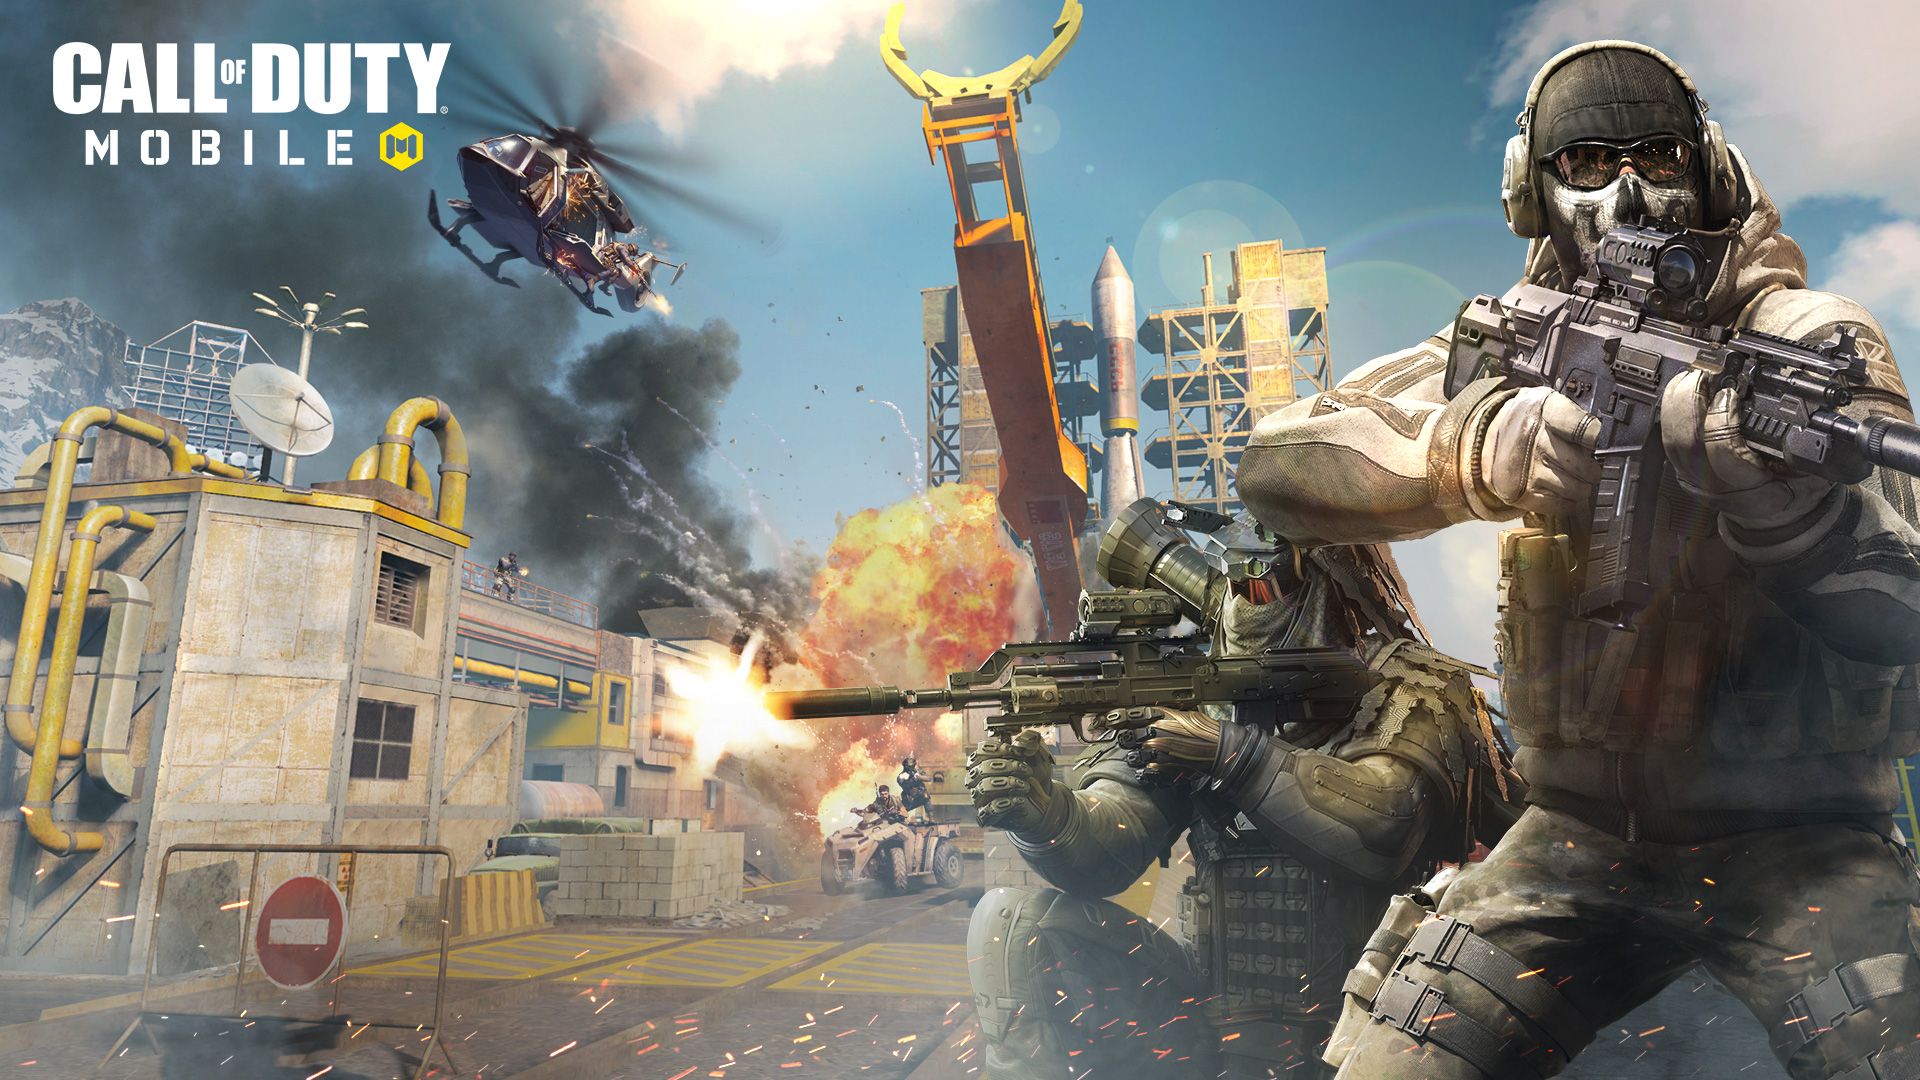 Call of Duty Mobile Has Had Over 20 Million Installs During Its First Day Bringing In Roughly $2 Million In Revenue